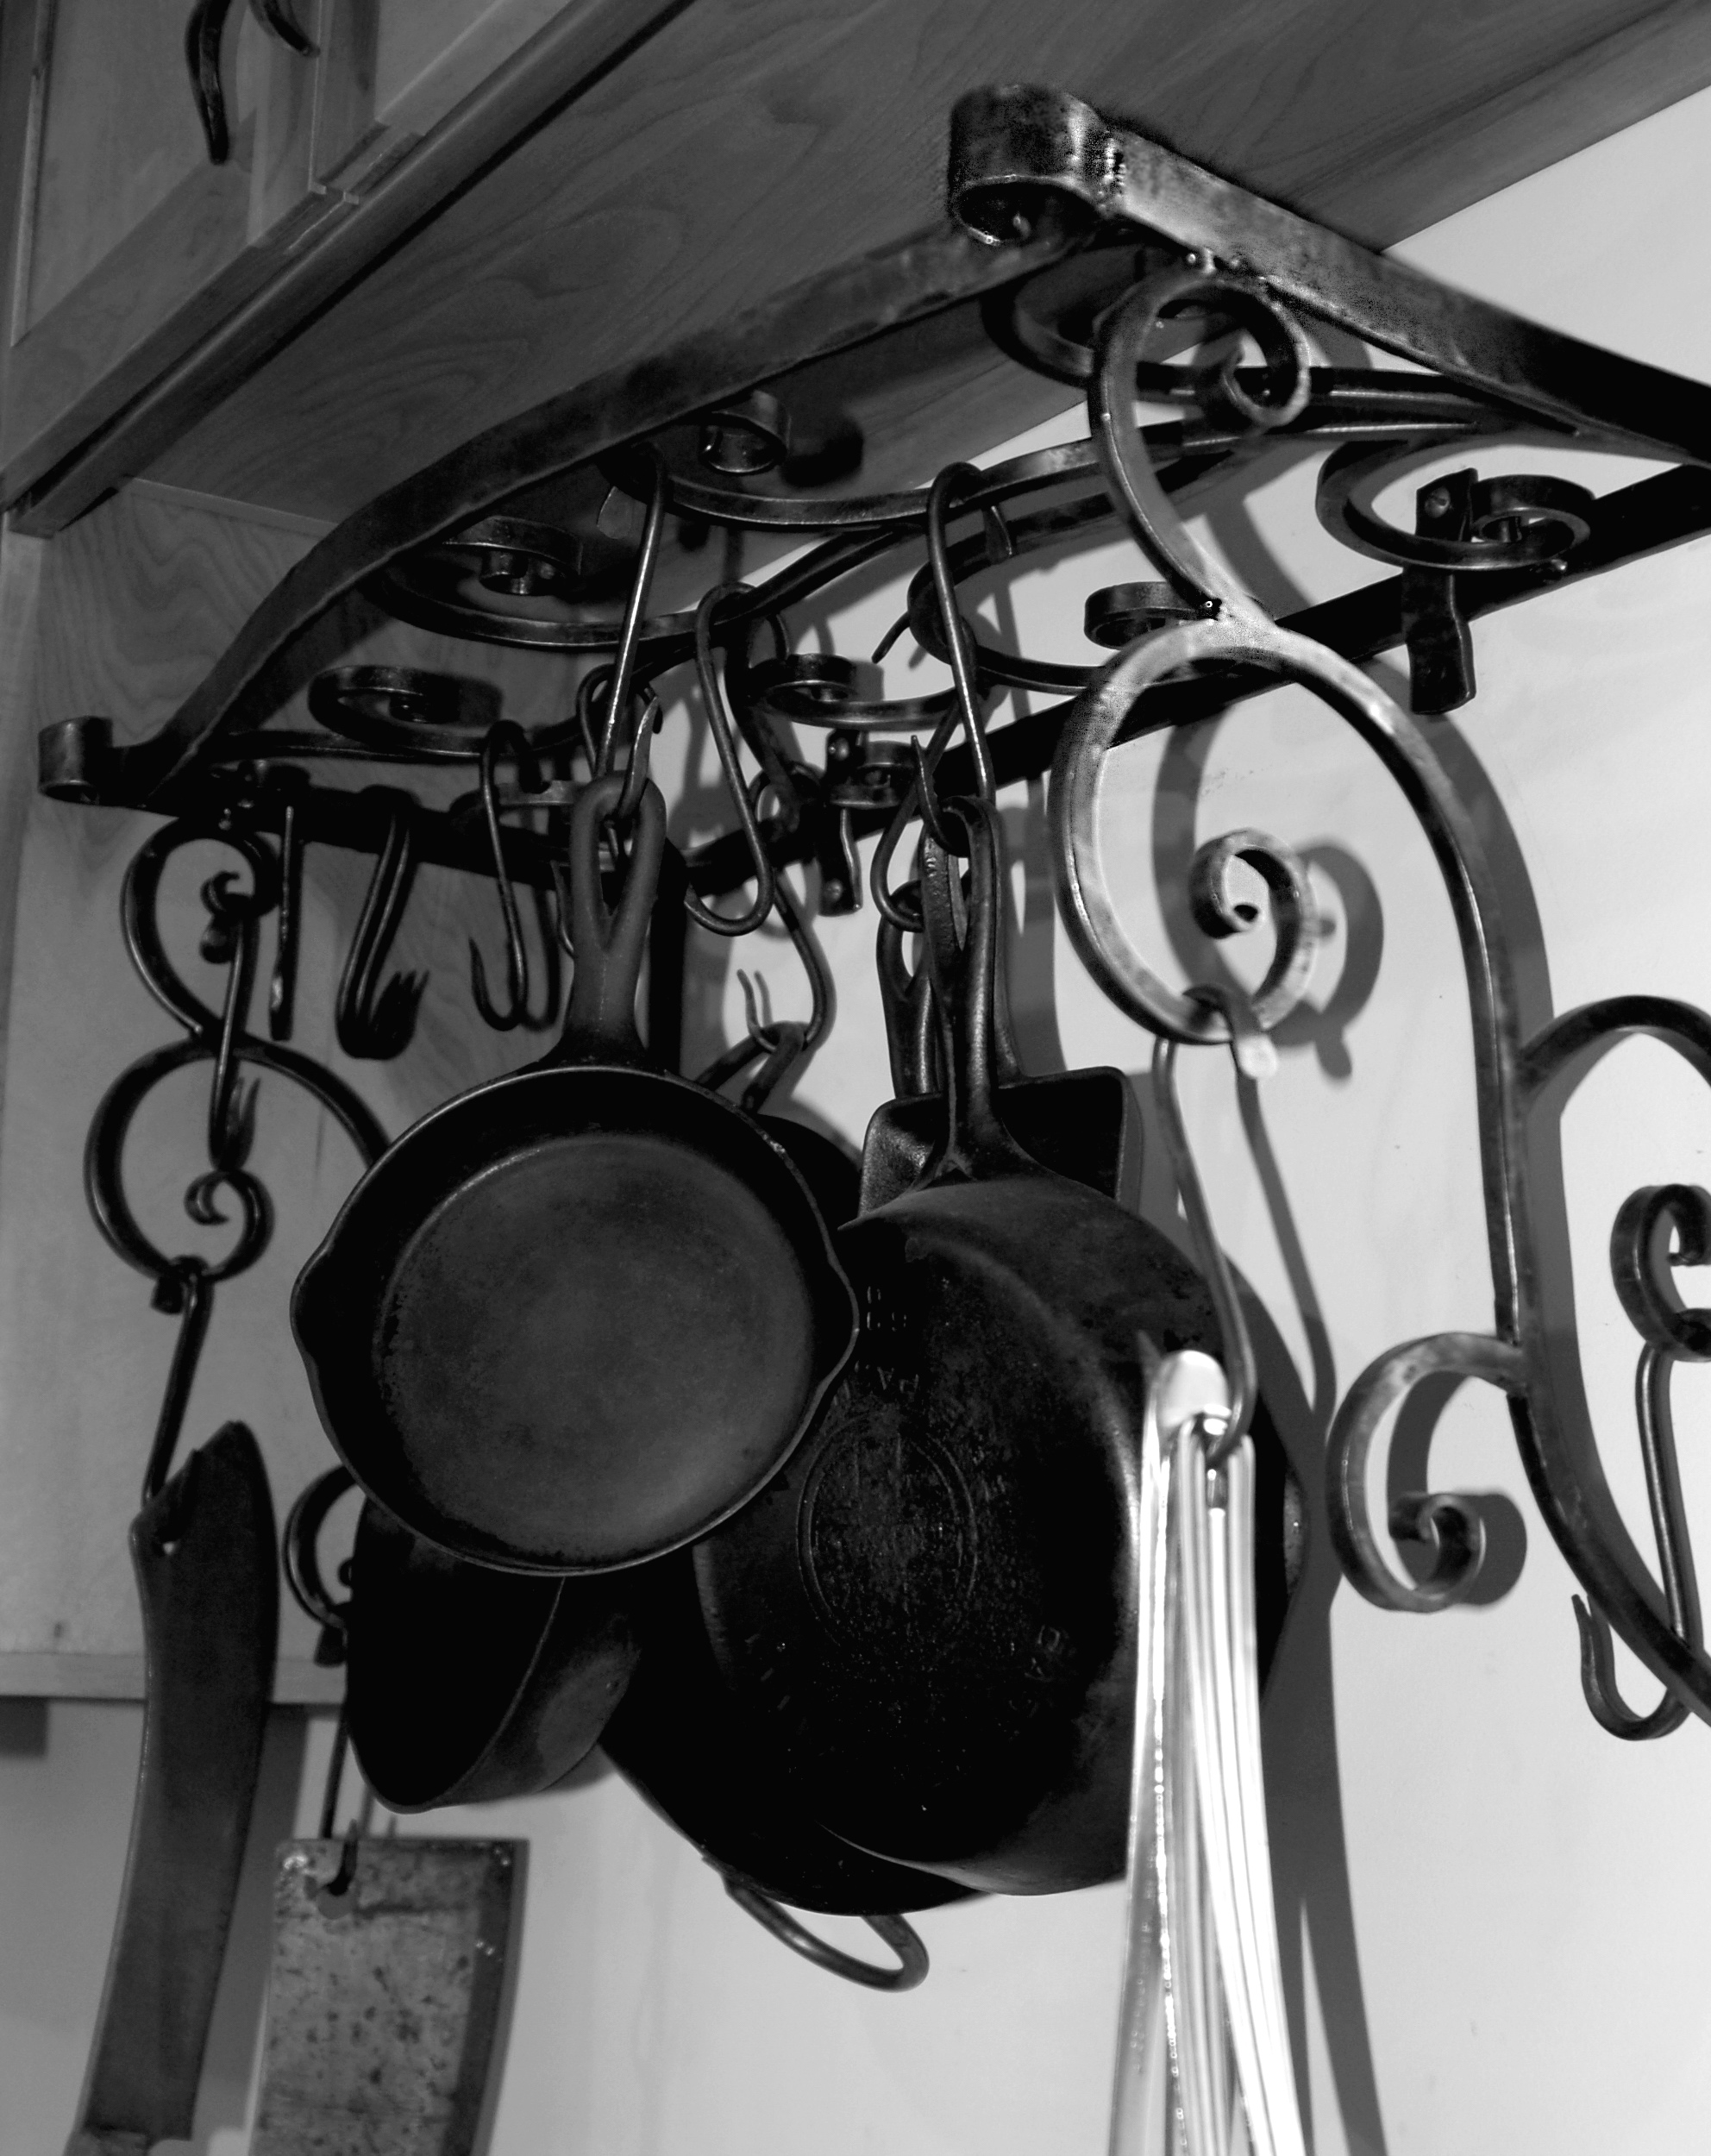 POT RACK - custom made to fit cabinets